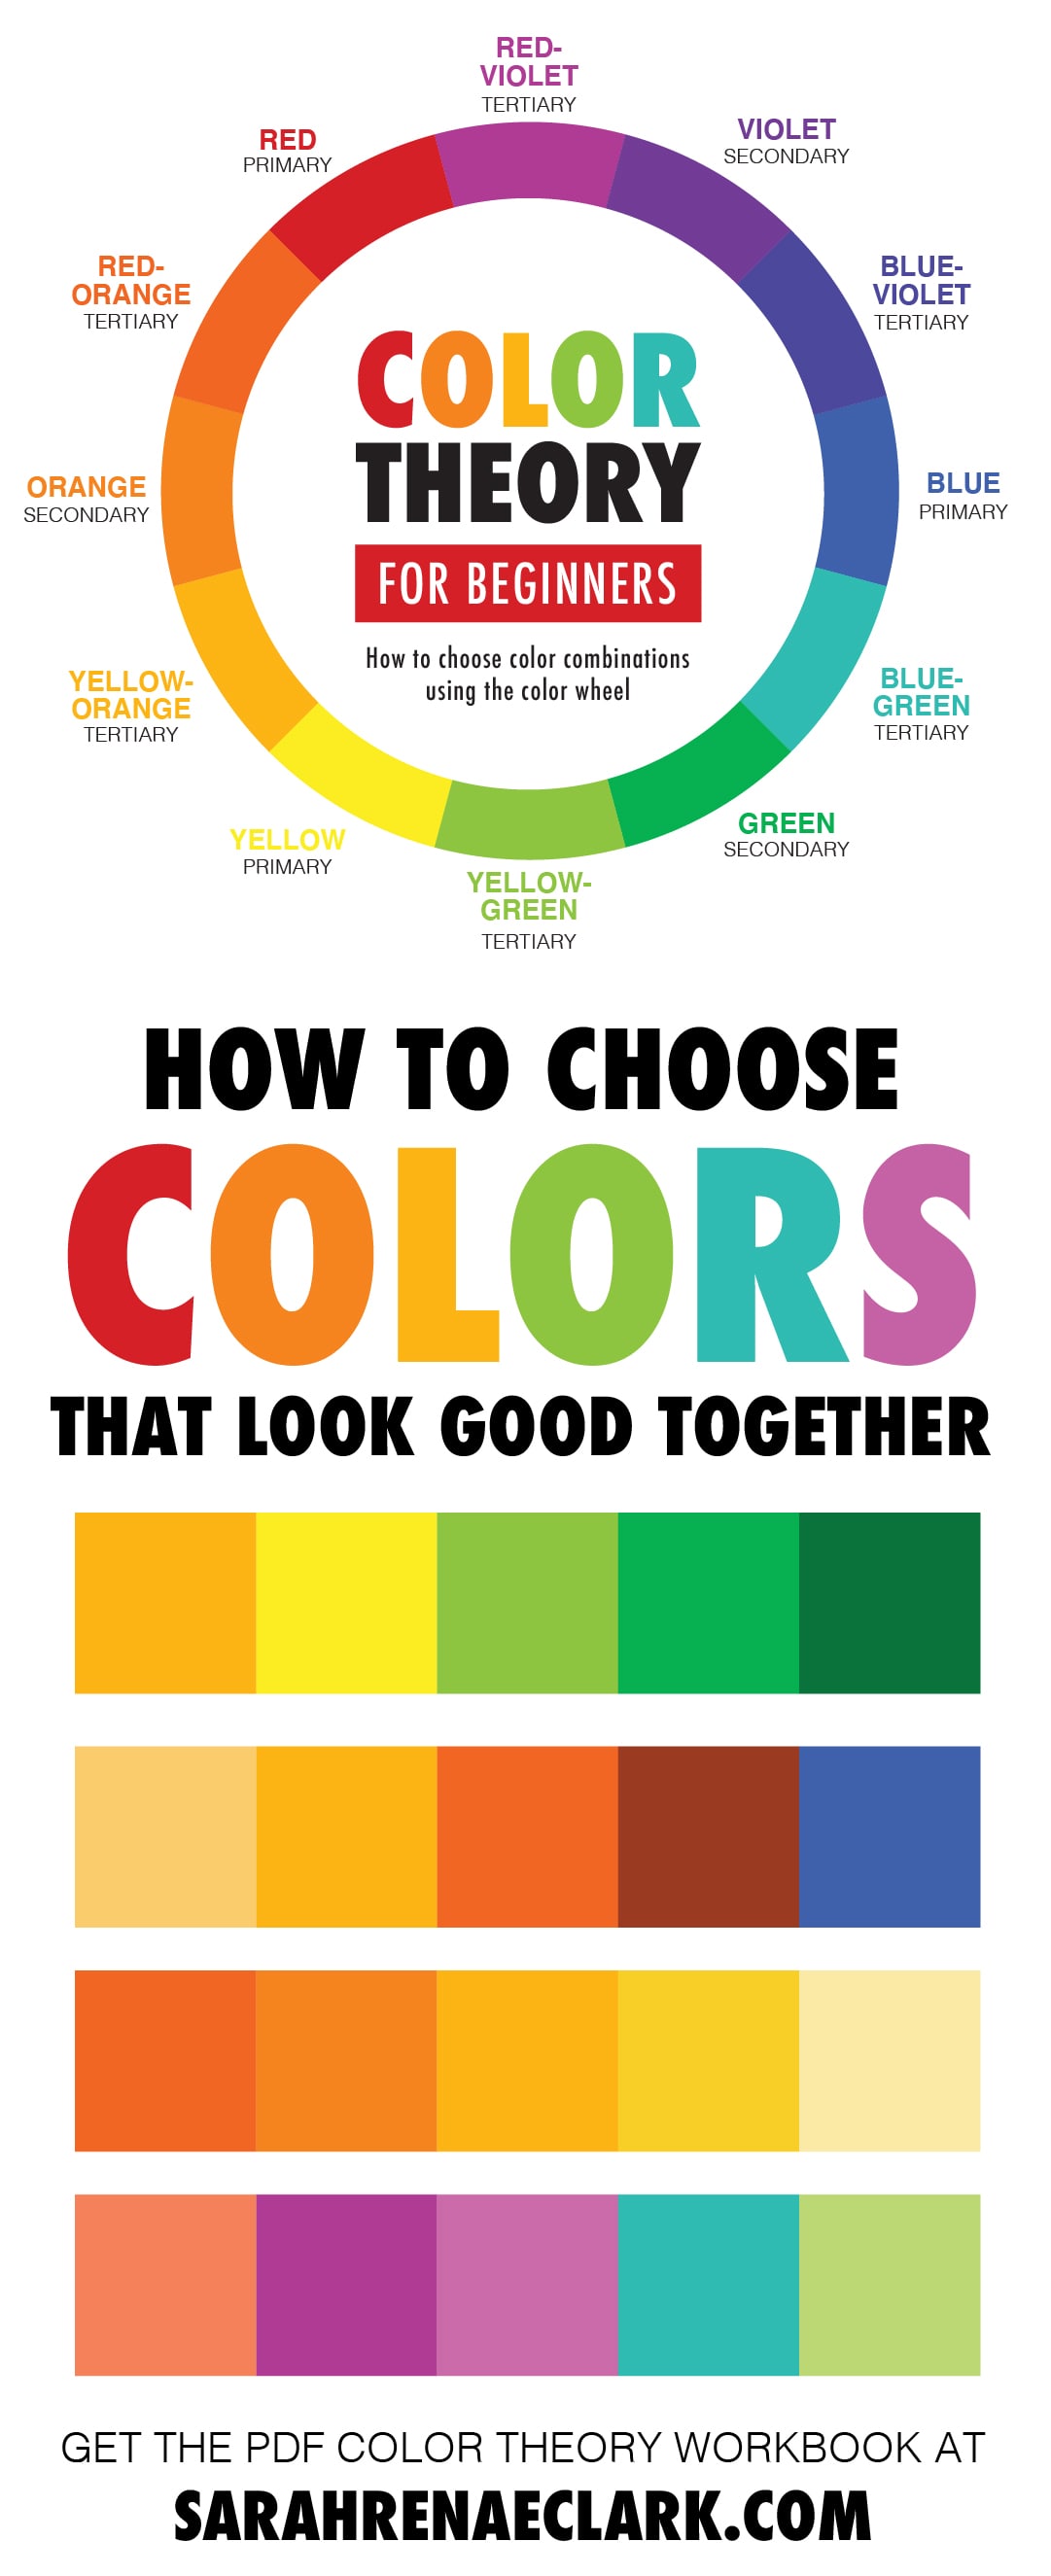 Download Color Theory for Beginners: Using the Color Wheel and Color Harmonies